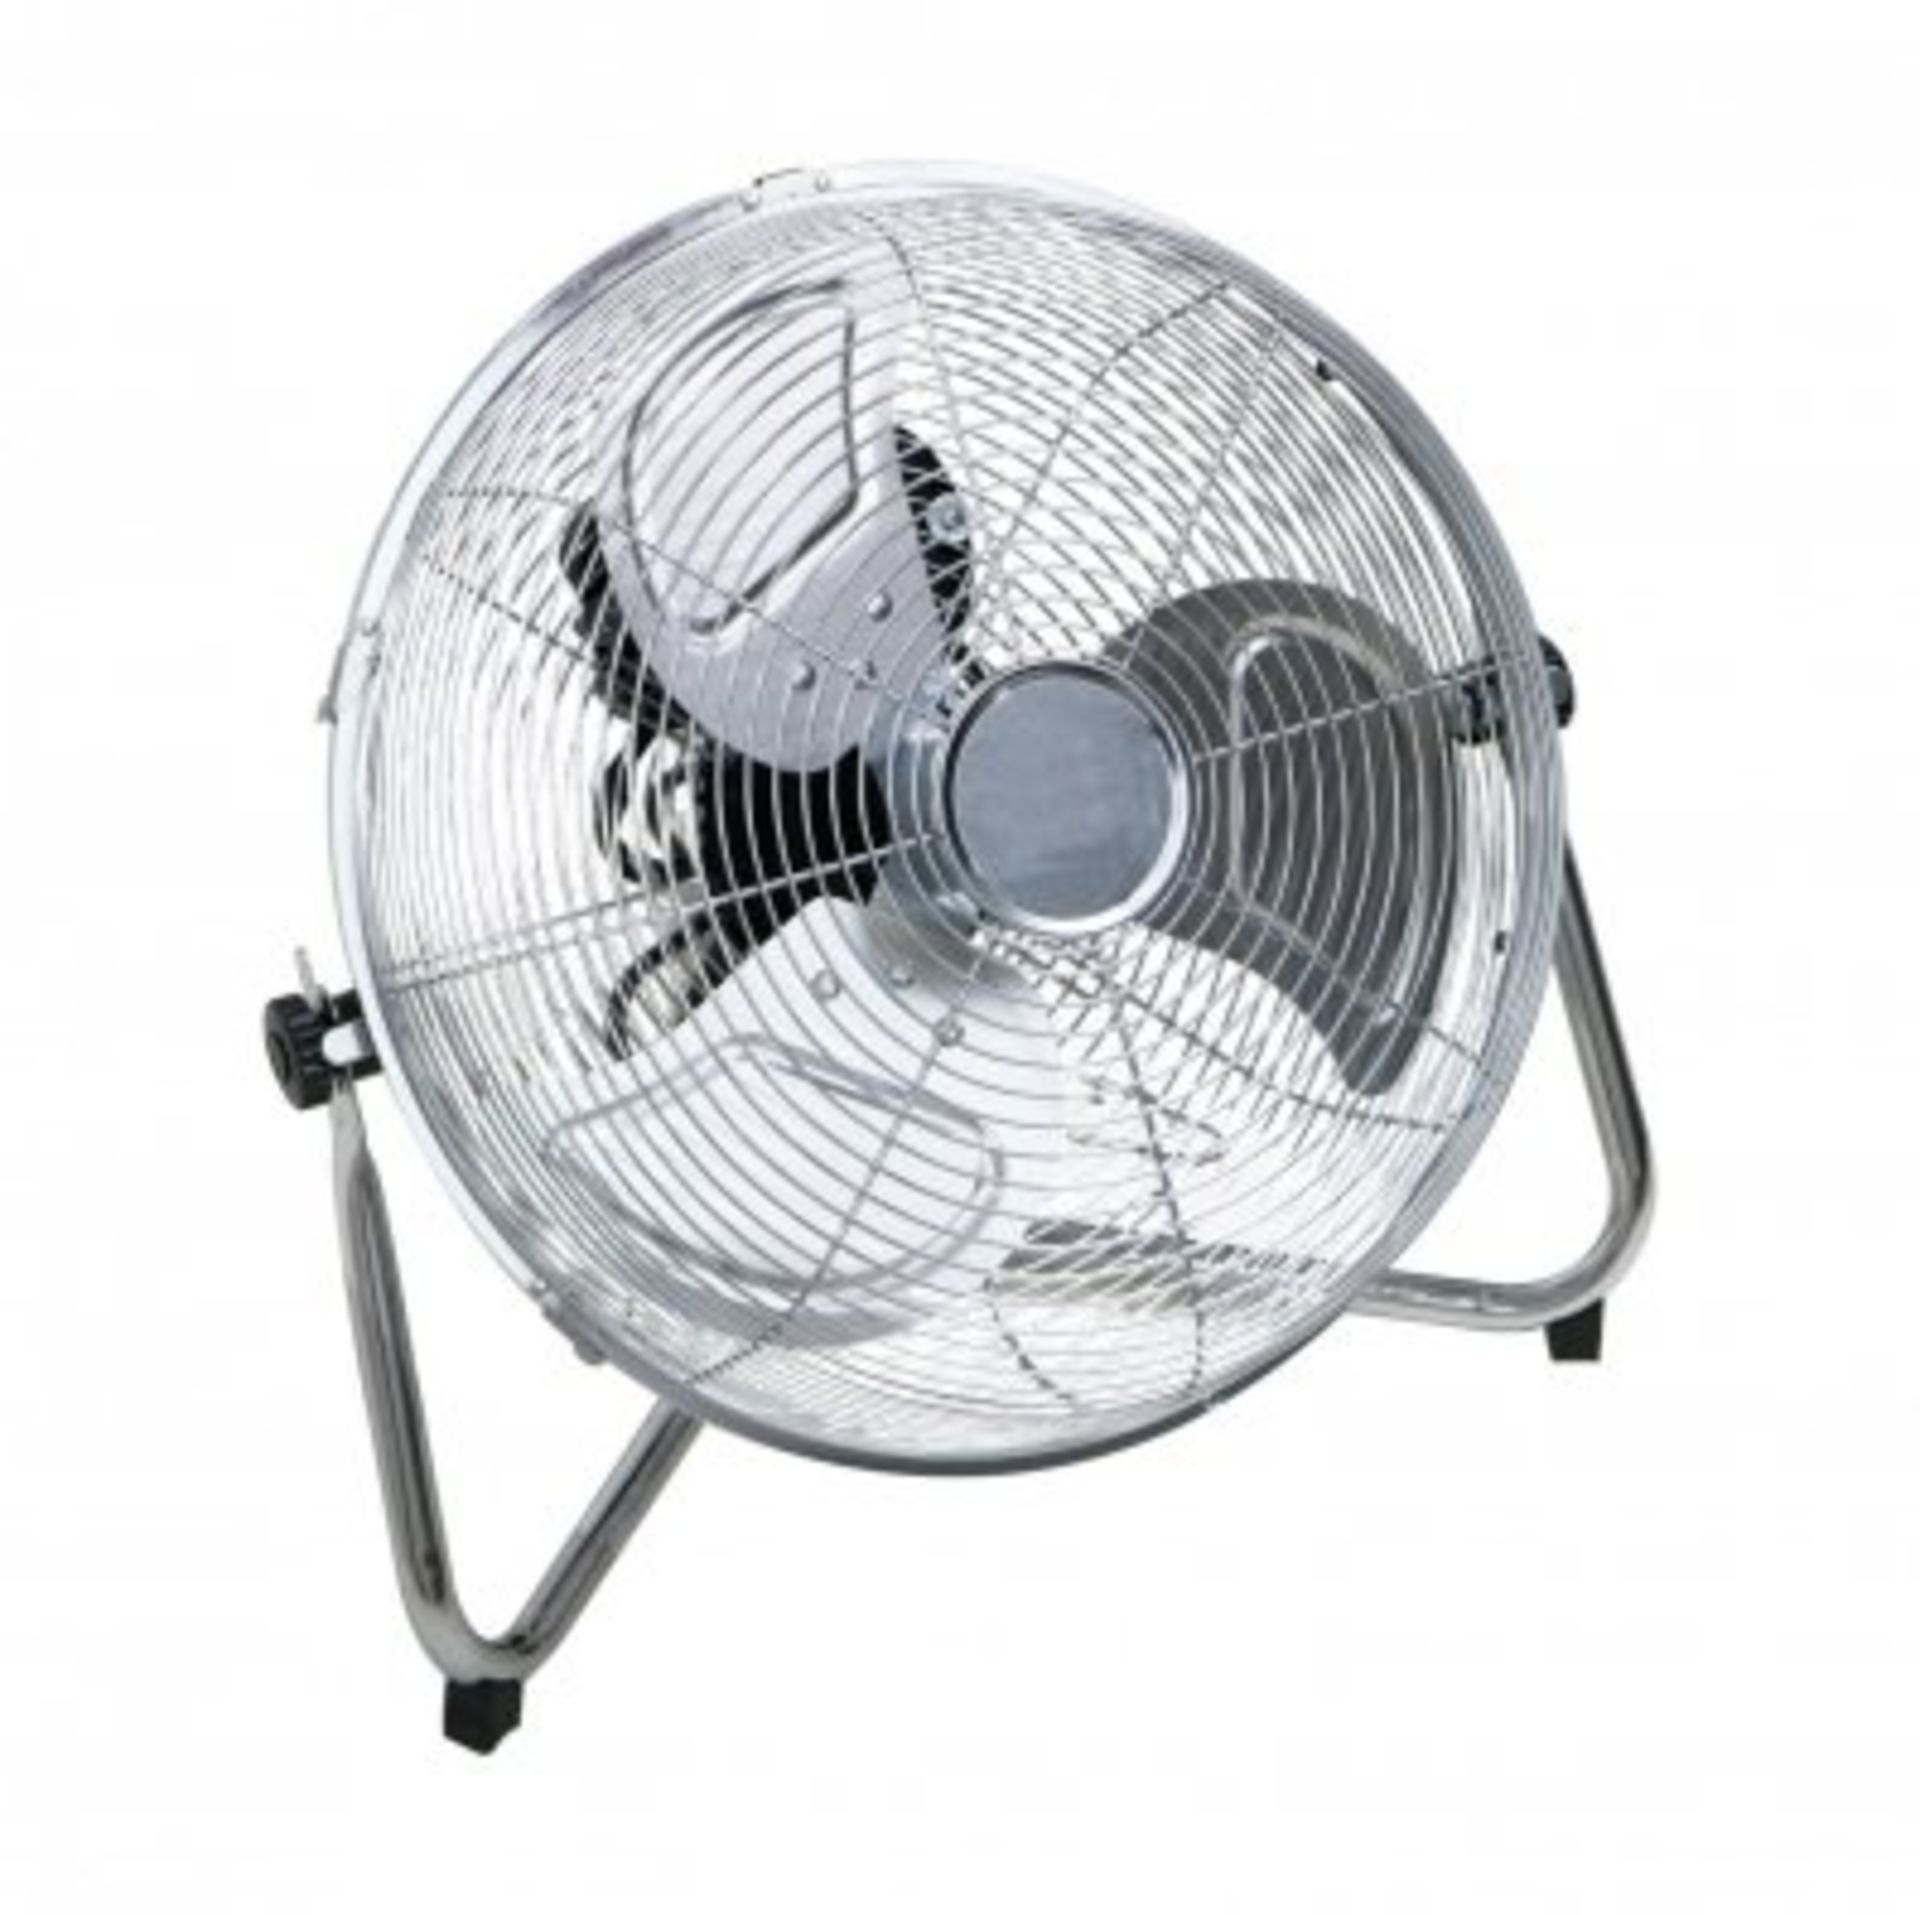 (RL124) 12" Inch Chrome 3 Speed Floor Standing Gym Fan Hydroponic Stay cool this year with t...